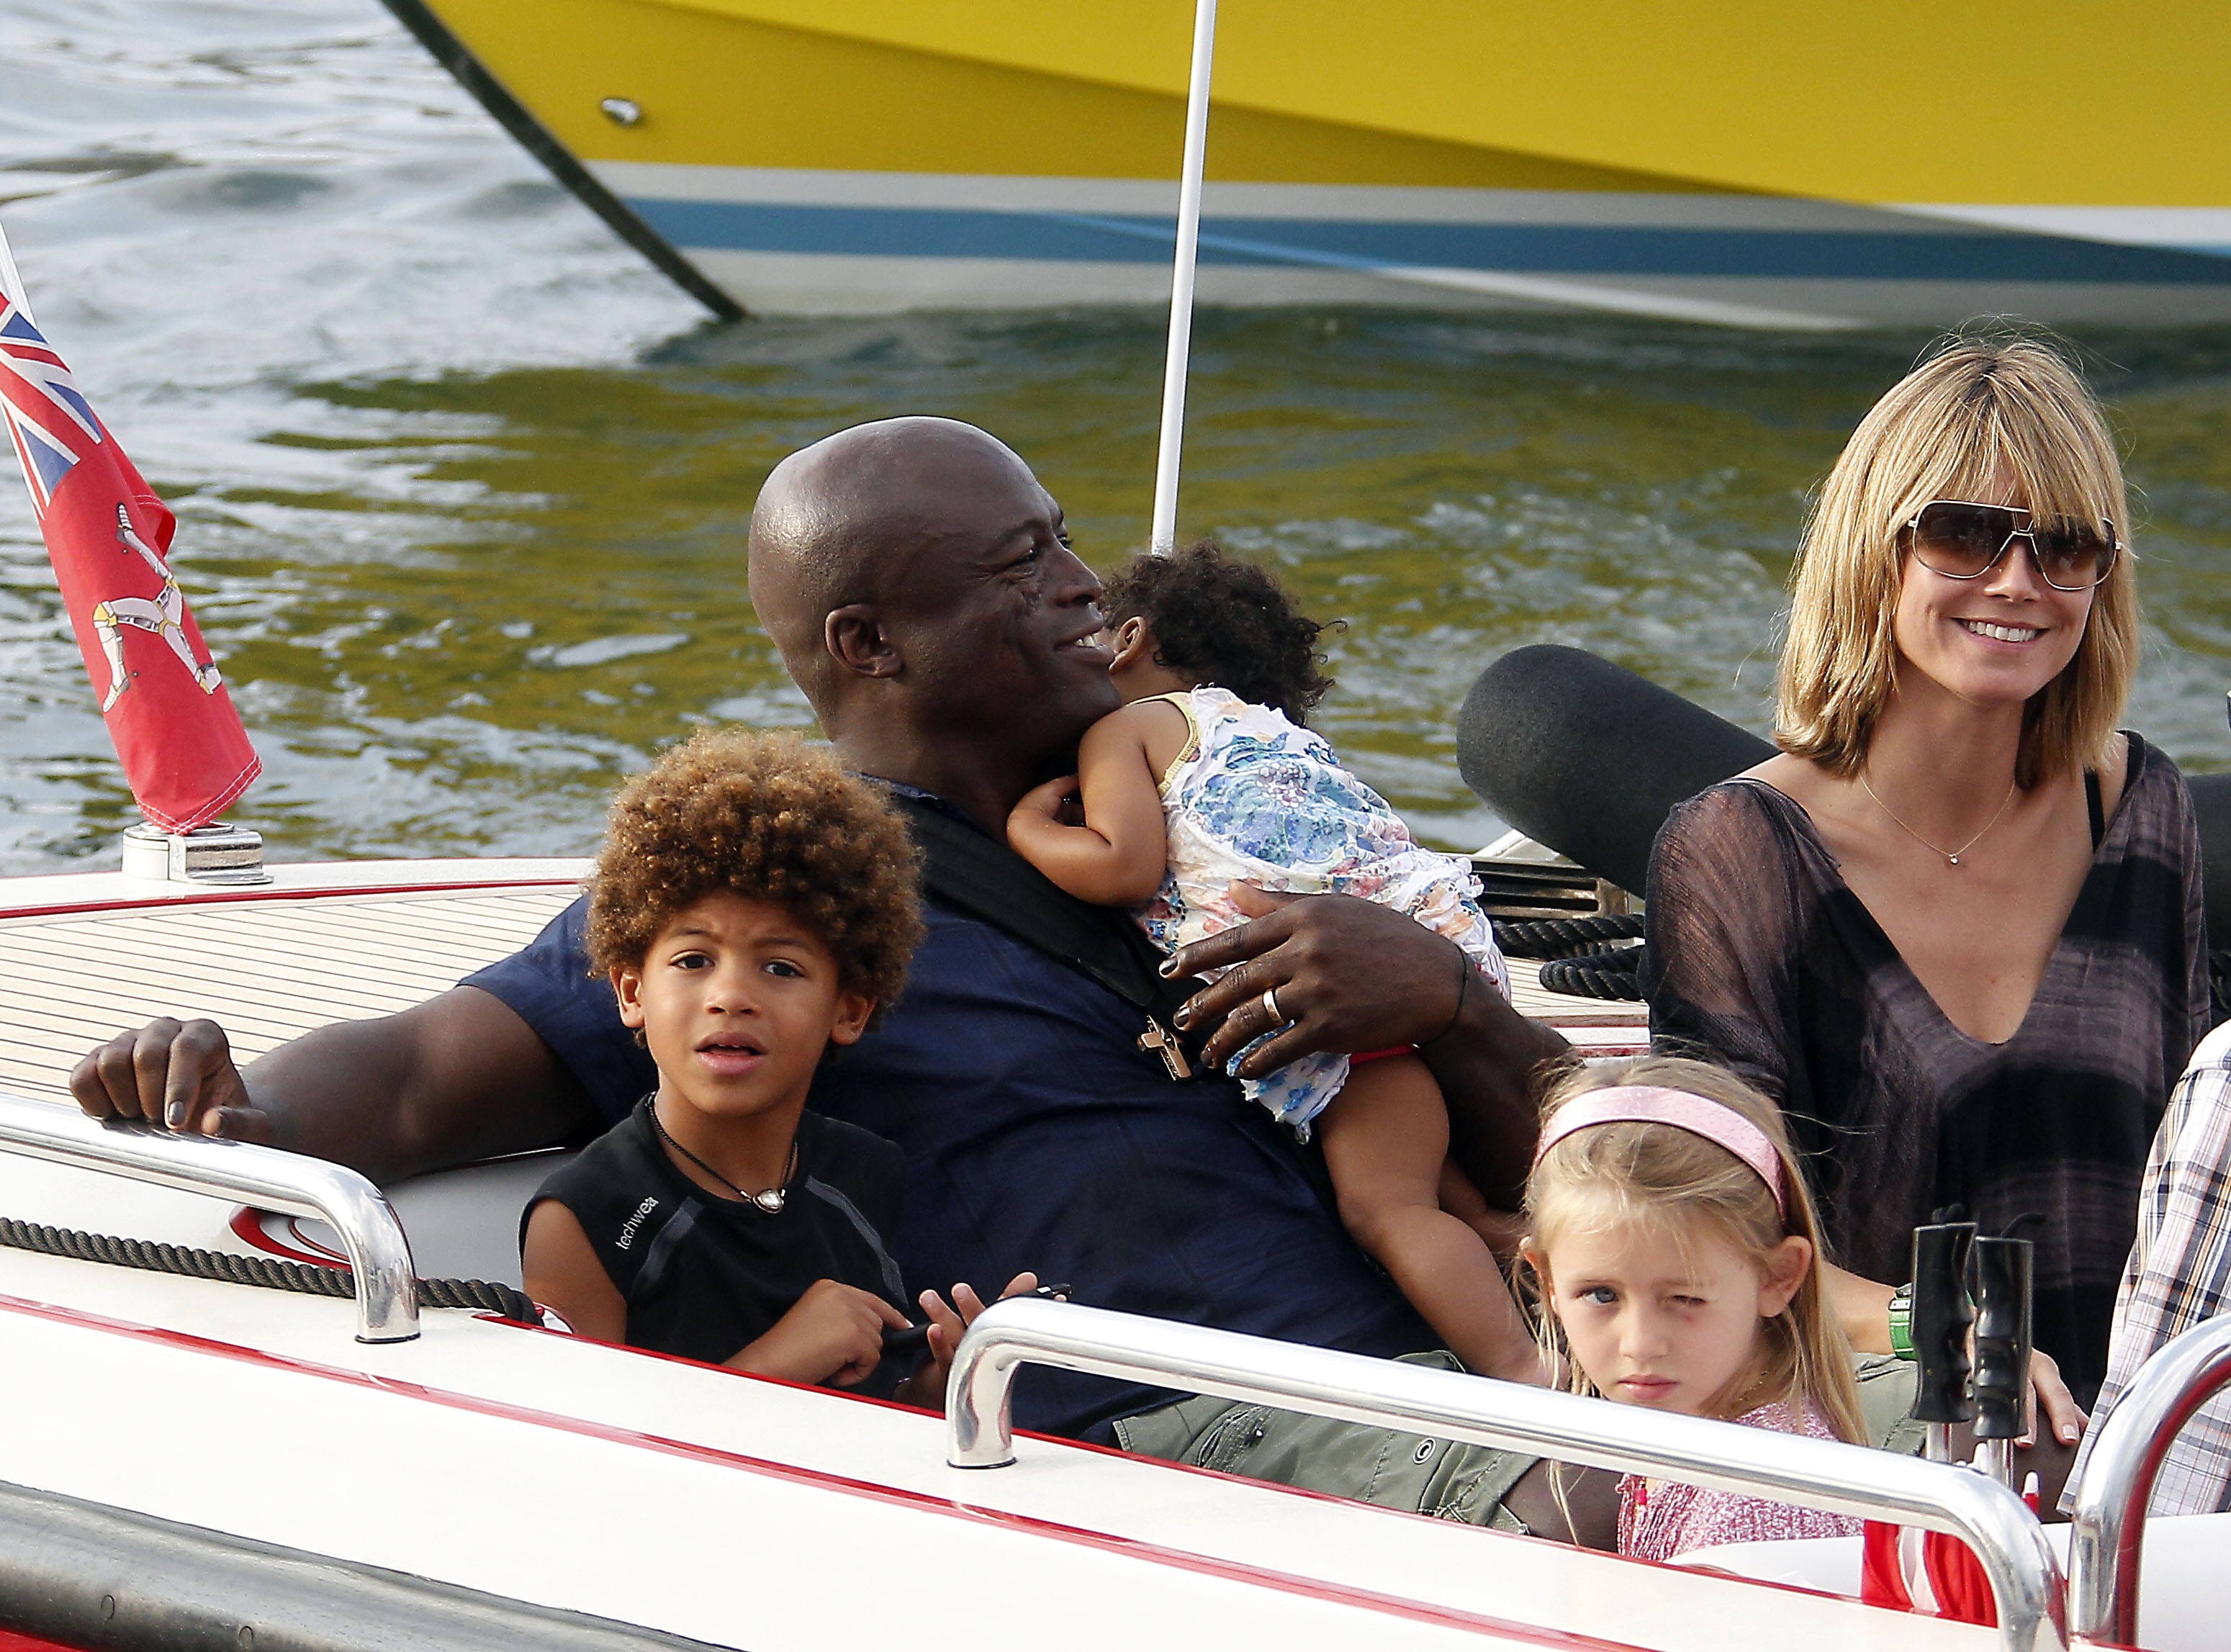 Heidi Klum and Seal spotted in France with three of their children in 2010. | Source: Getty images